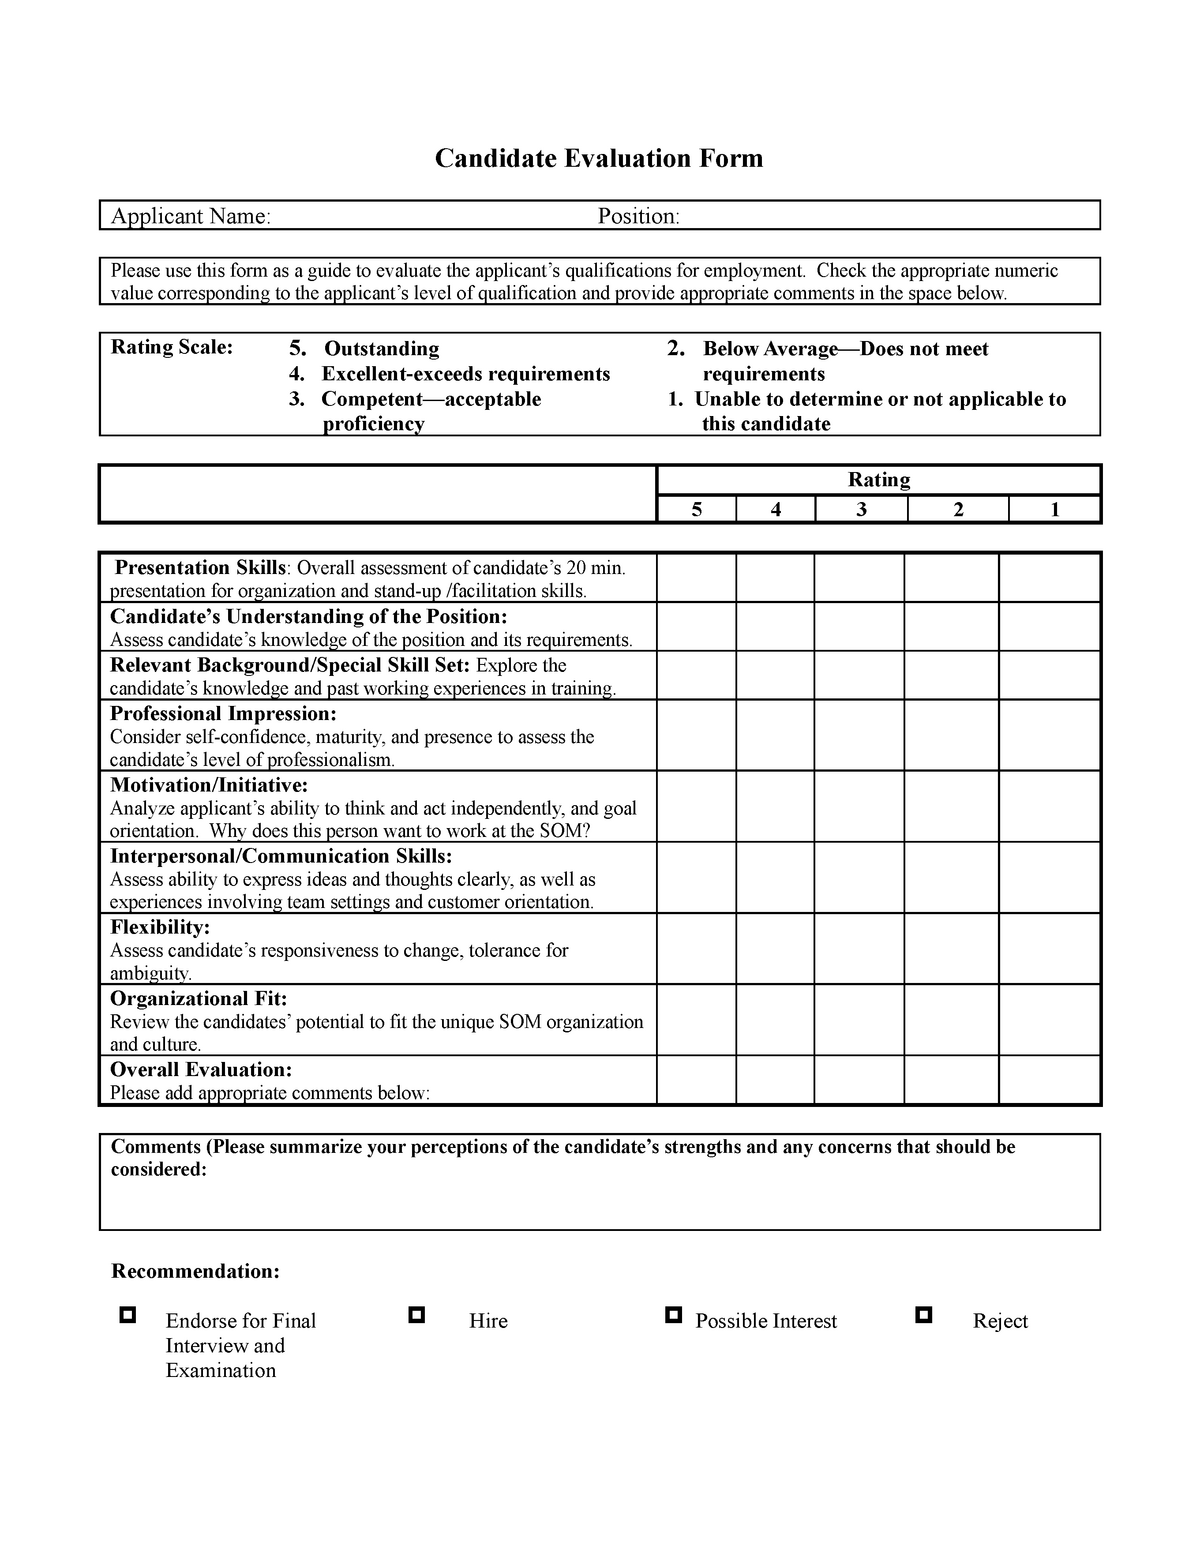 Candidate EVAL 191024 - PSY01 Candidate Evaluation Form Applicant Name ...